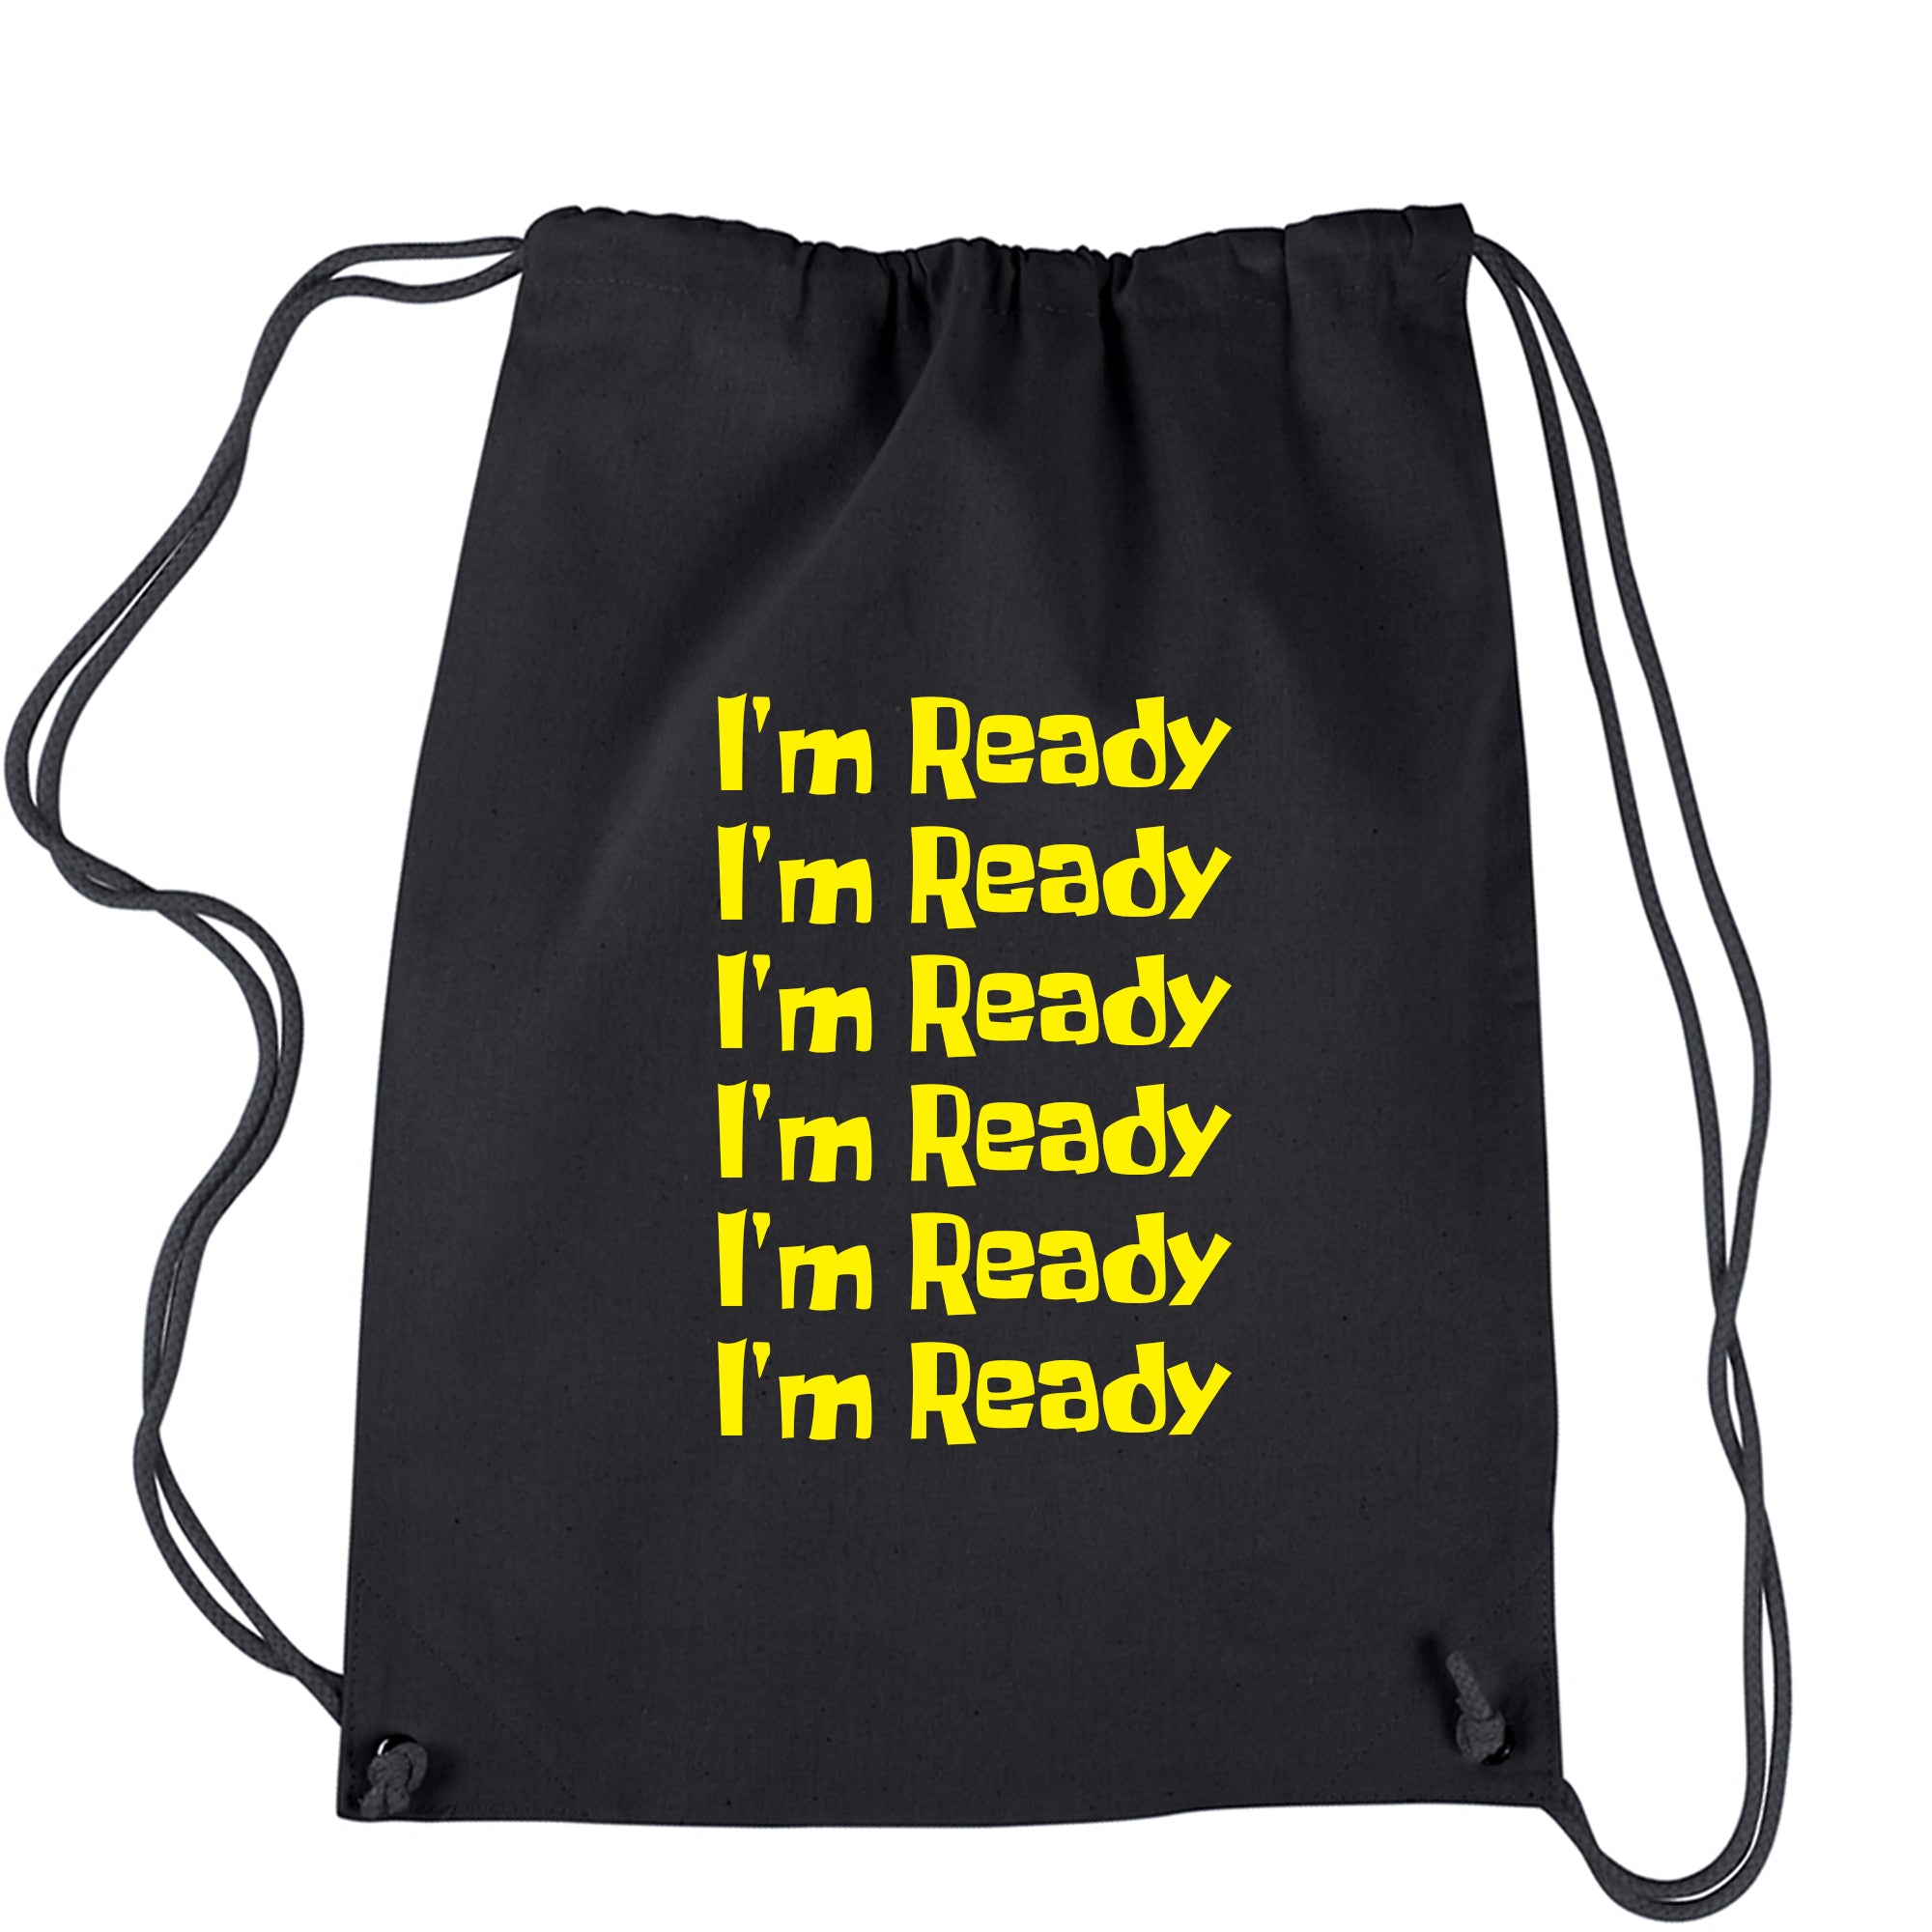 I'm Ready Funny Quote Catchphrase Spongebobble Drawstring Backpack